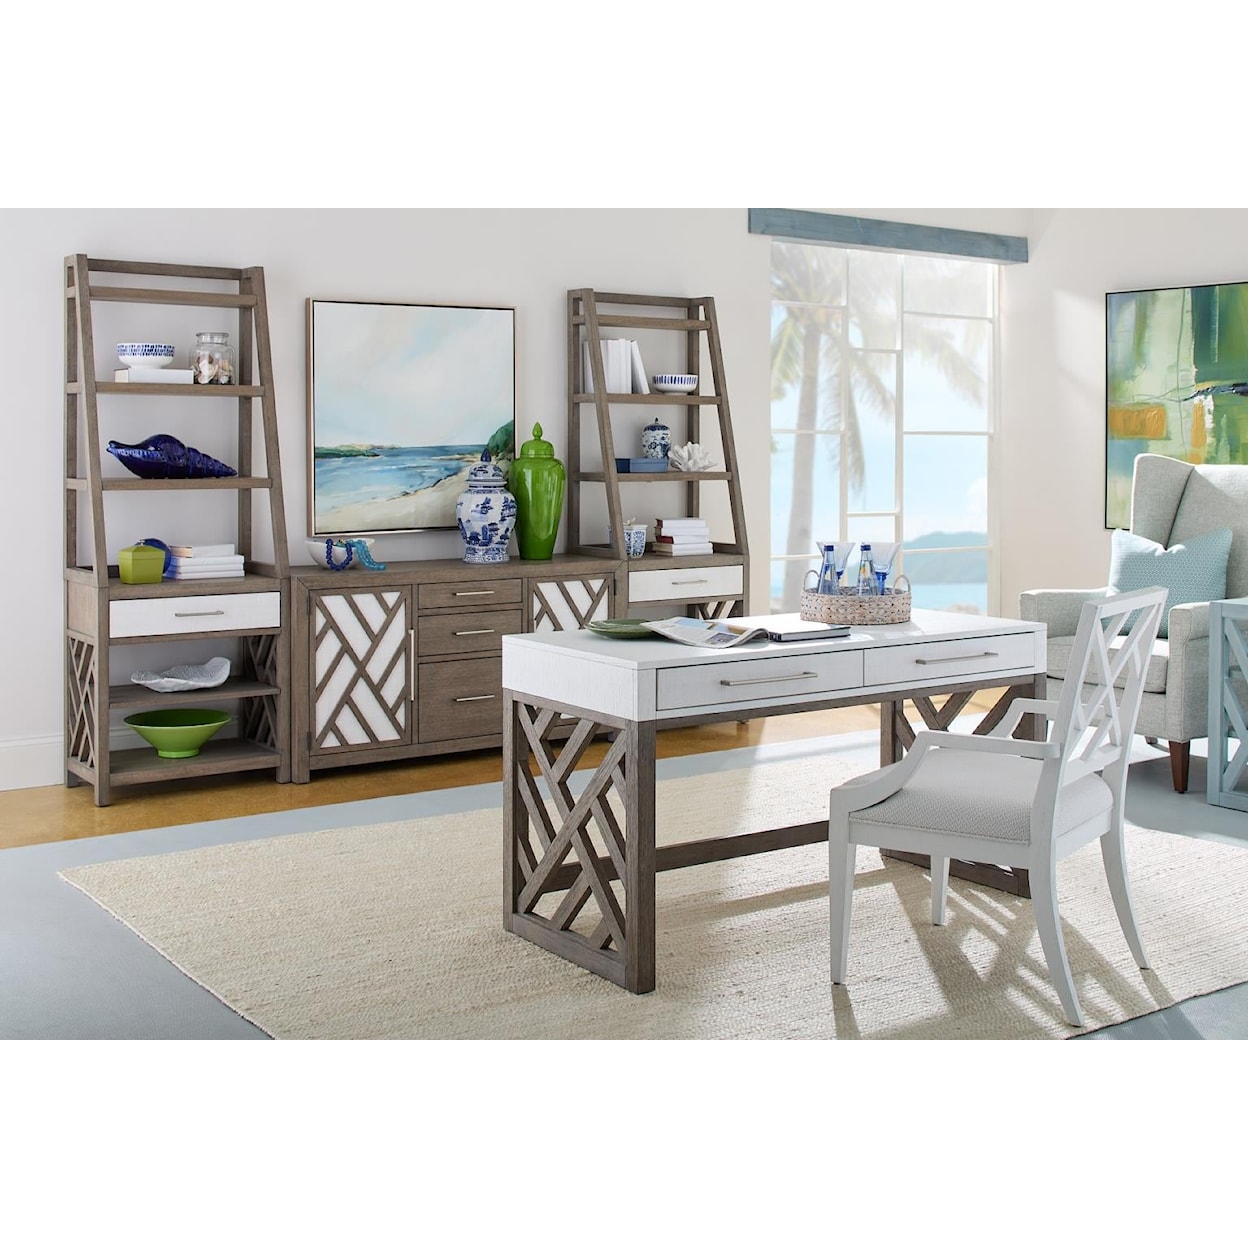 Trisha Yearwood Home Collection by Legacy Classic Staycation Home Office Credenza